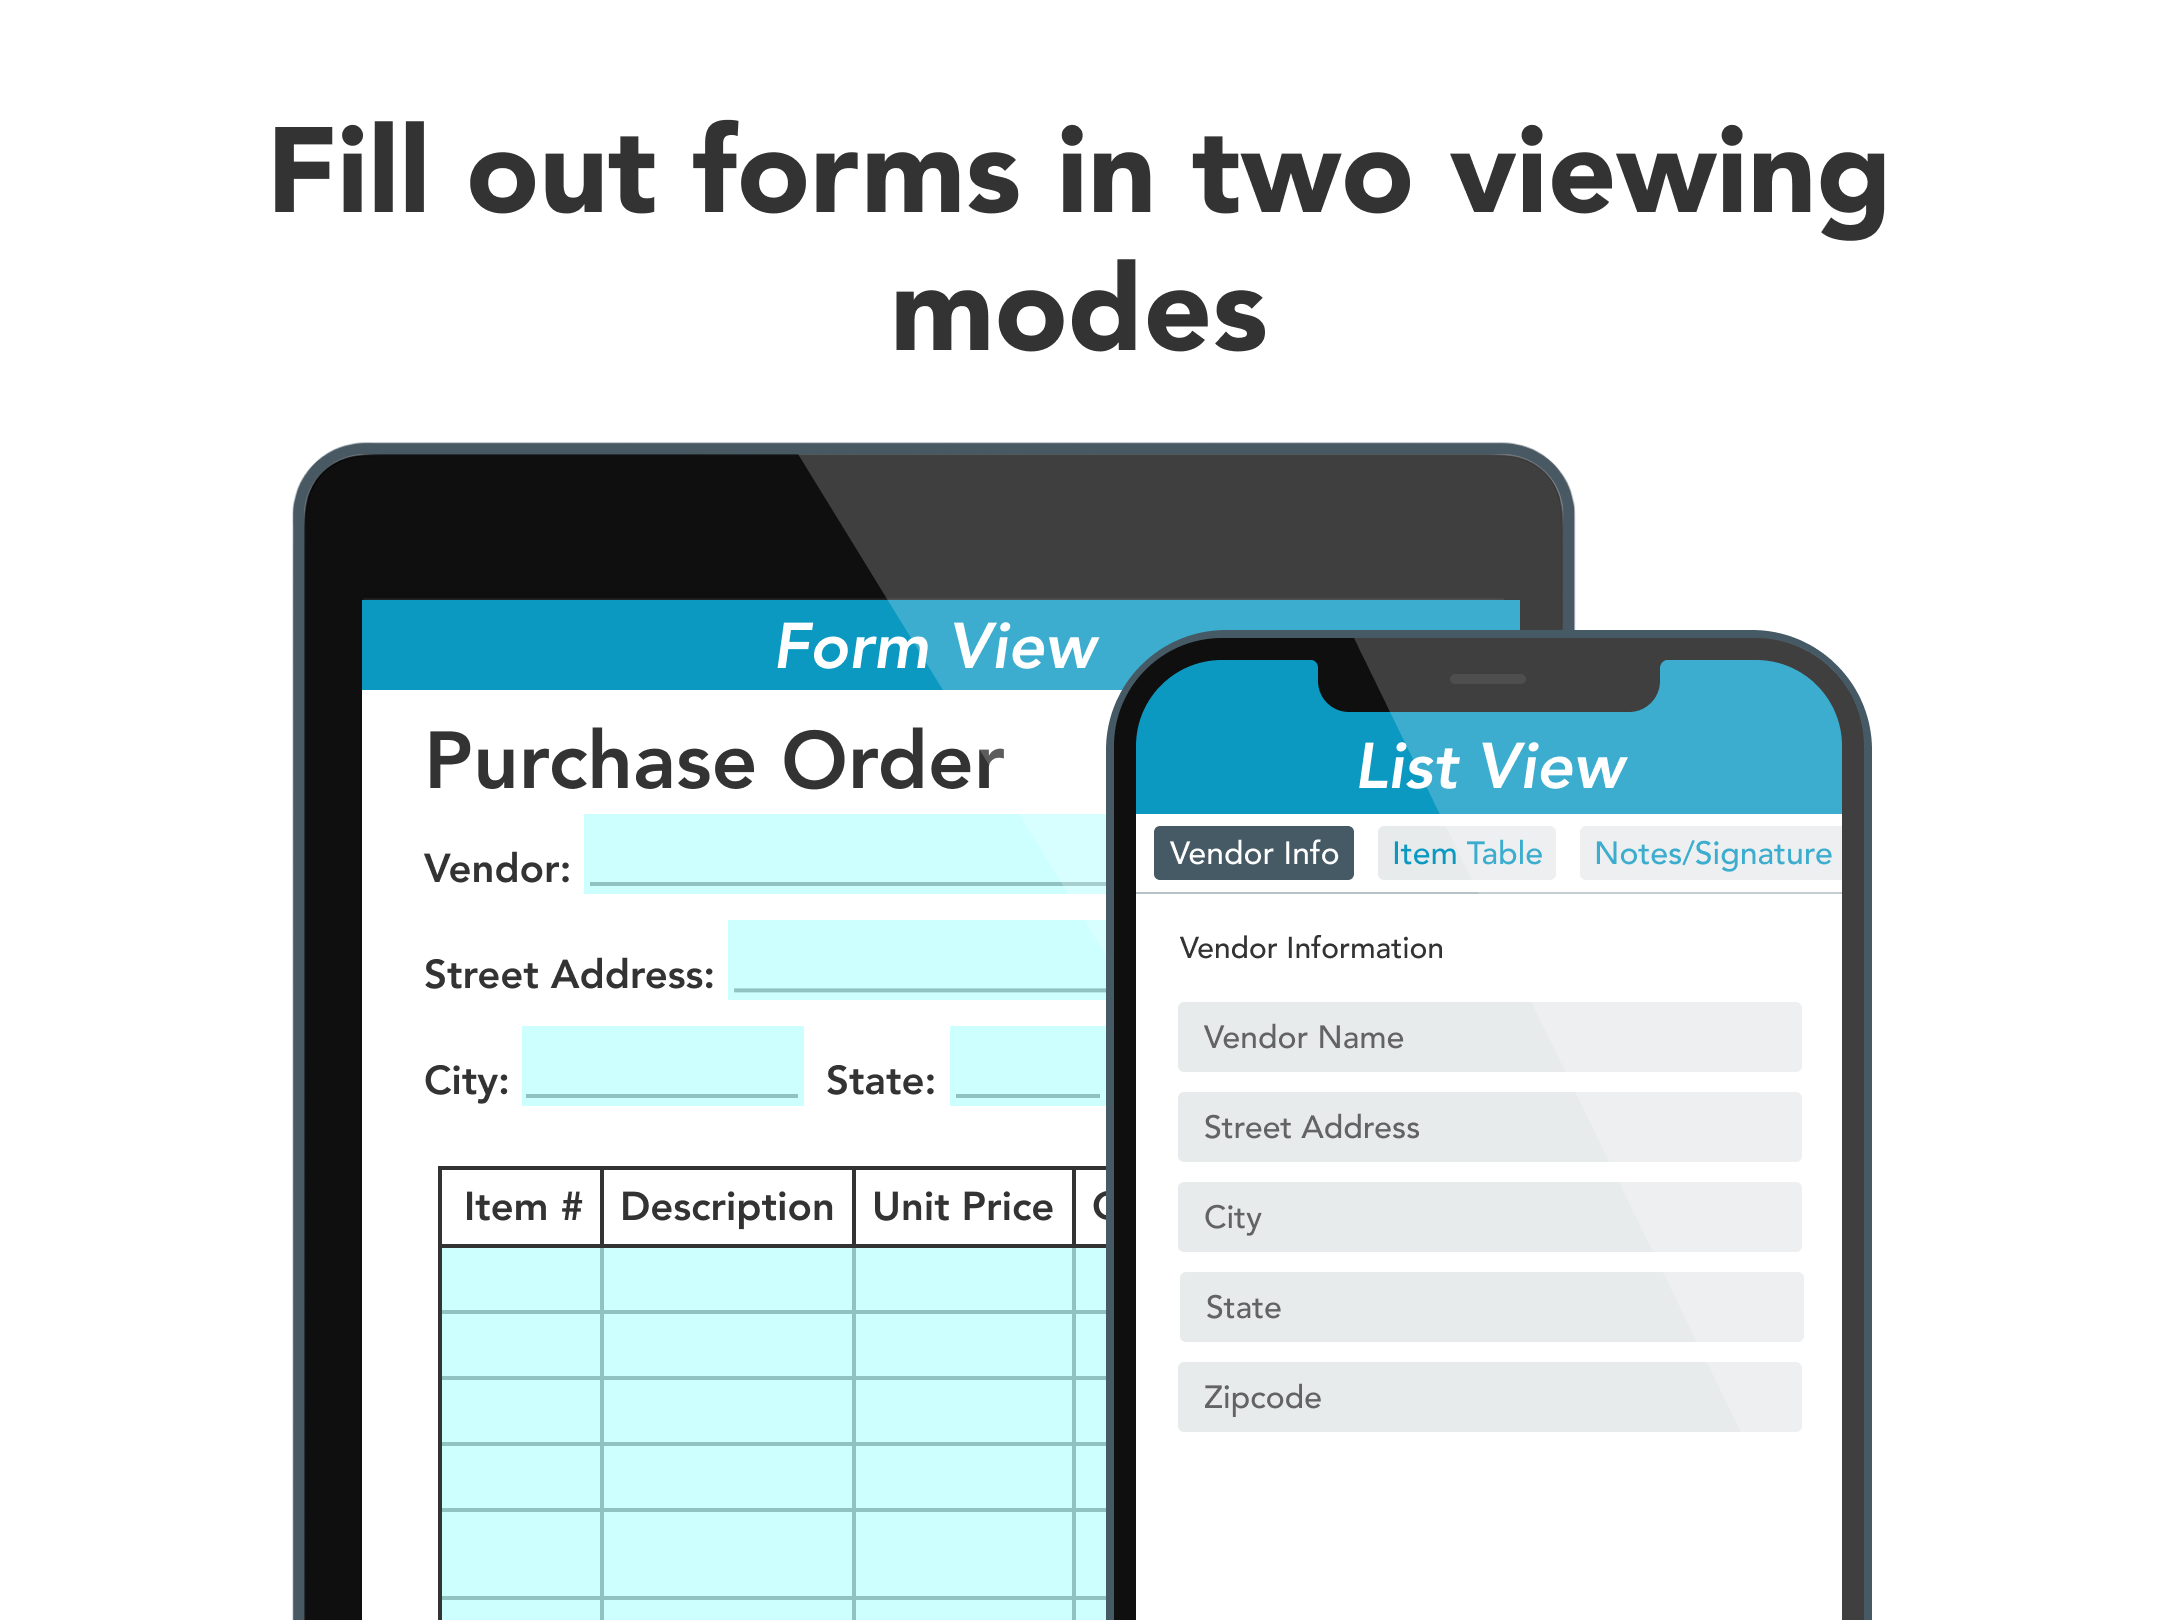 GoFormz provides two different viewing modes to enhance customer experience